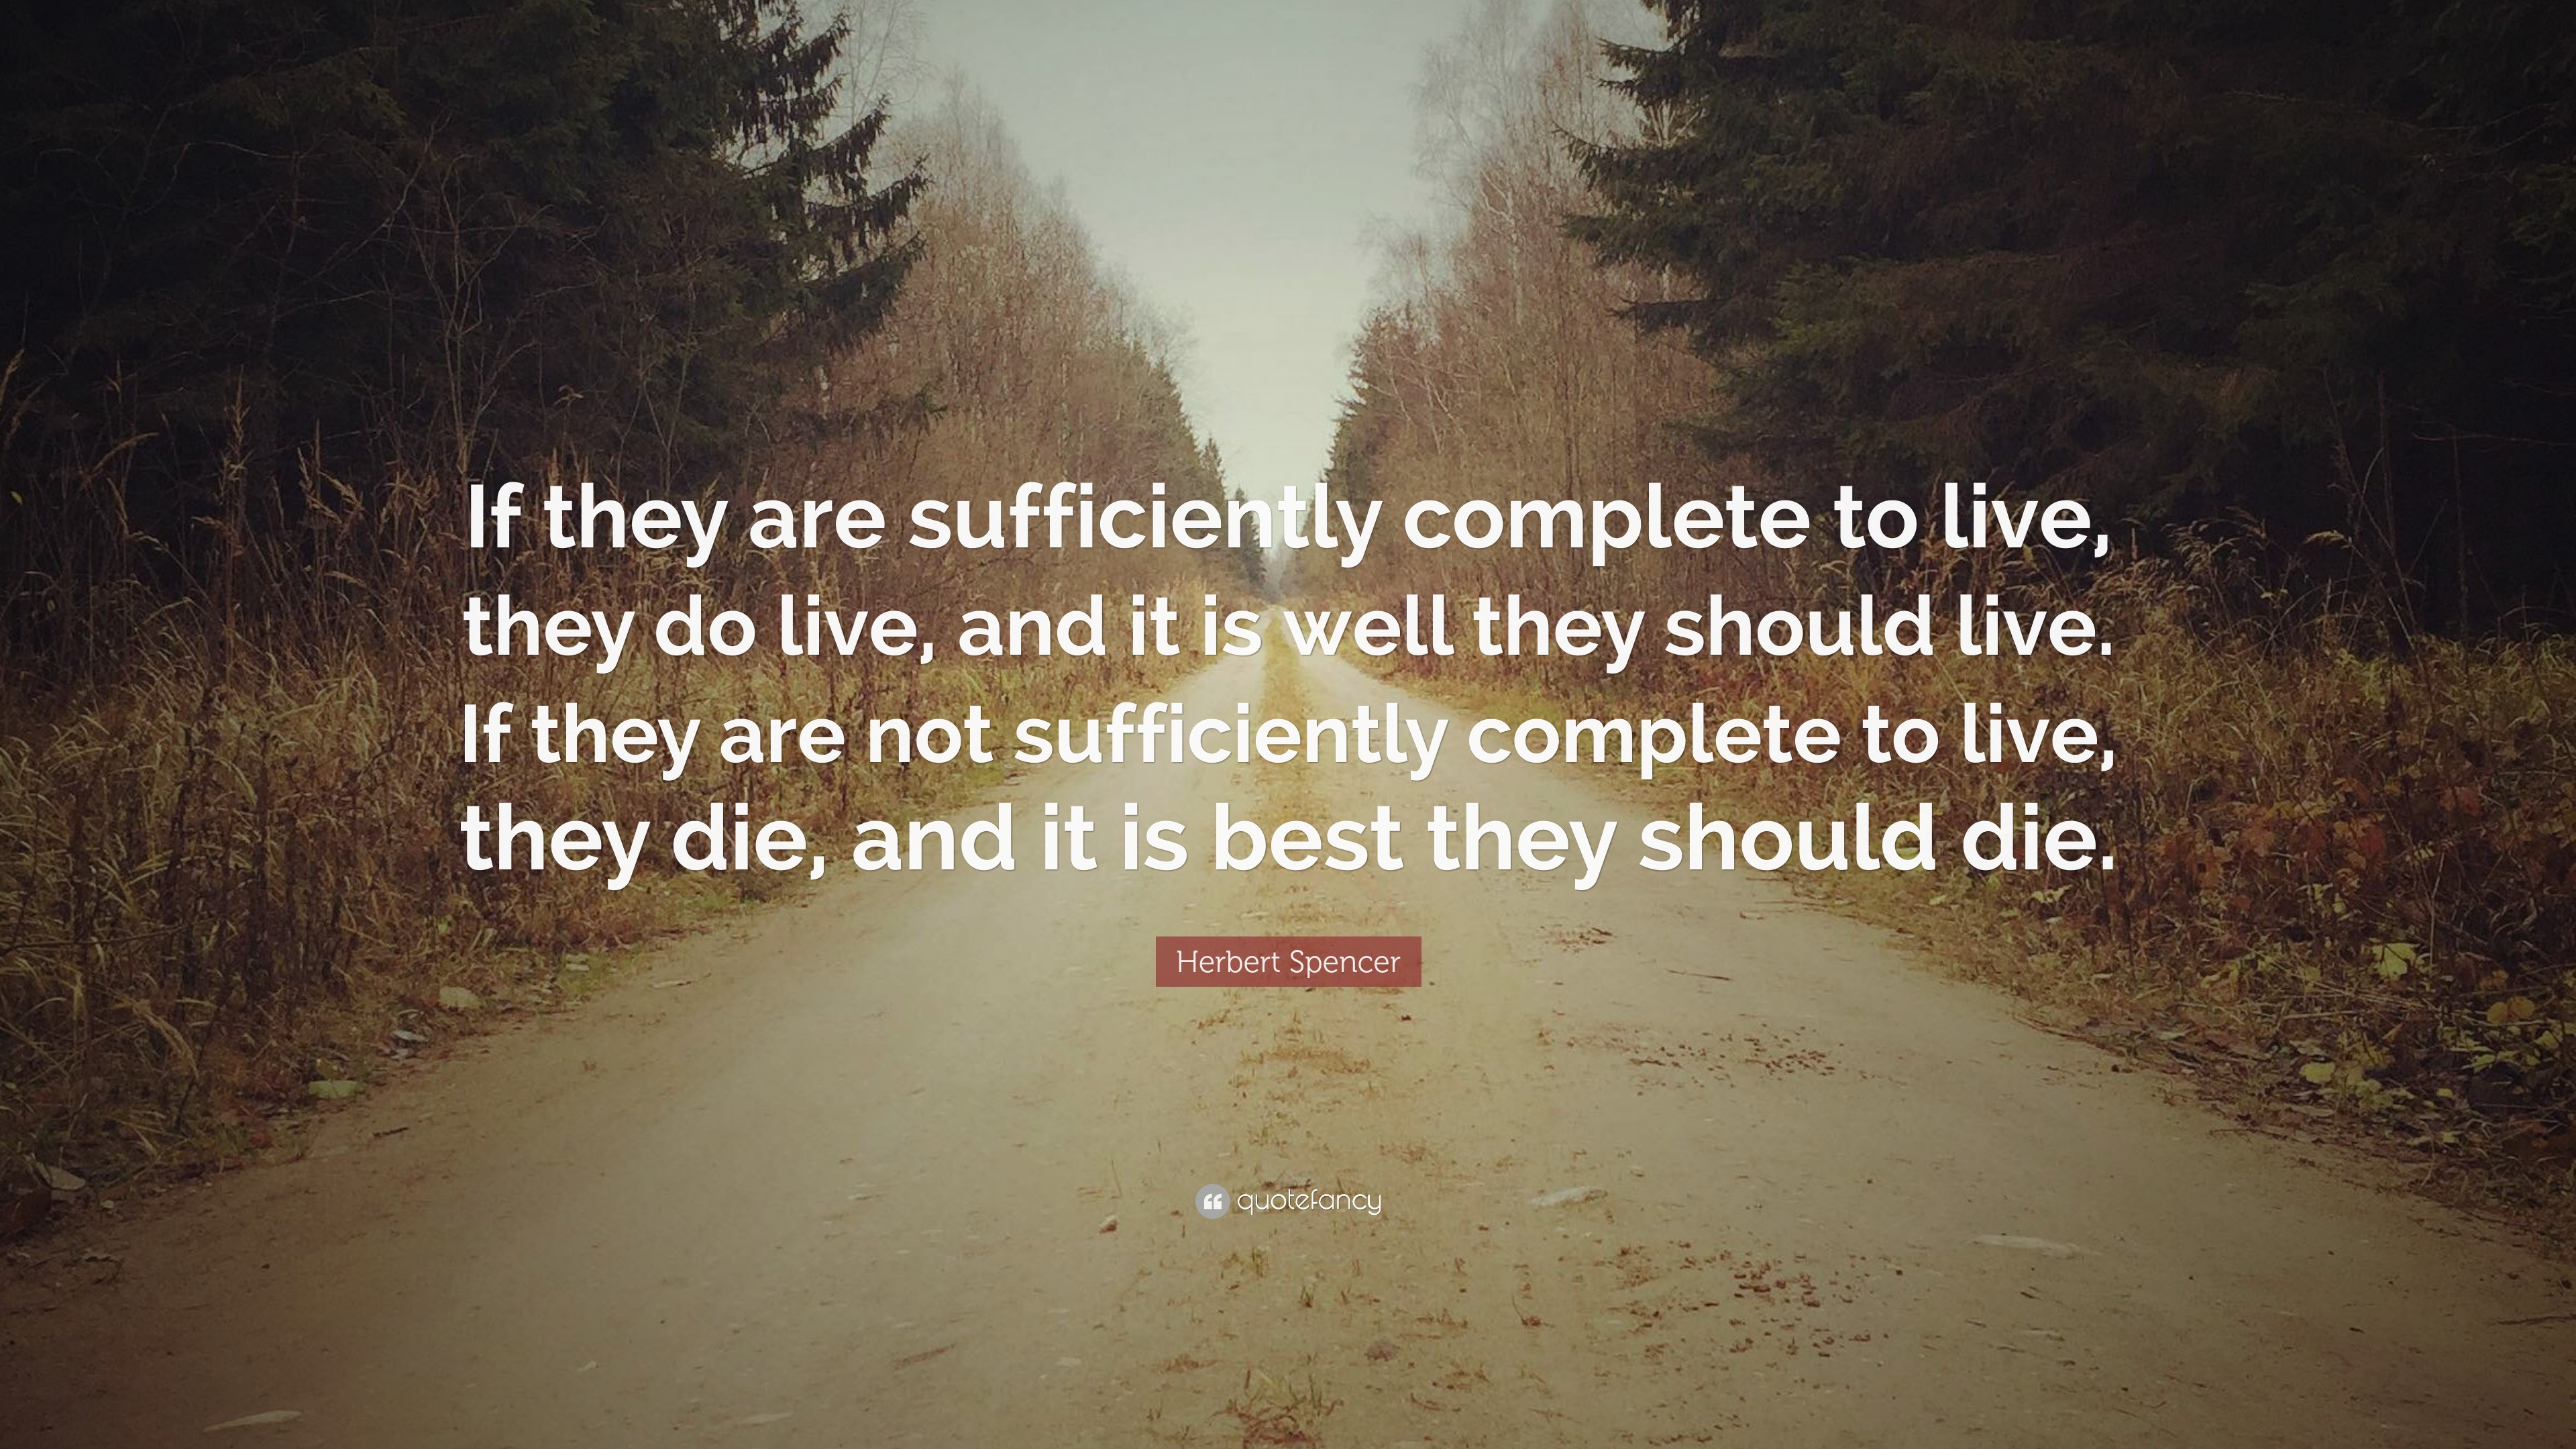 Herbert Spencer Quote: “If they are sufficiently complete to live, they ...